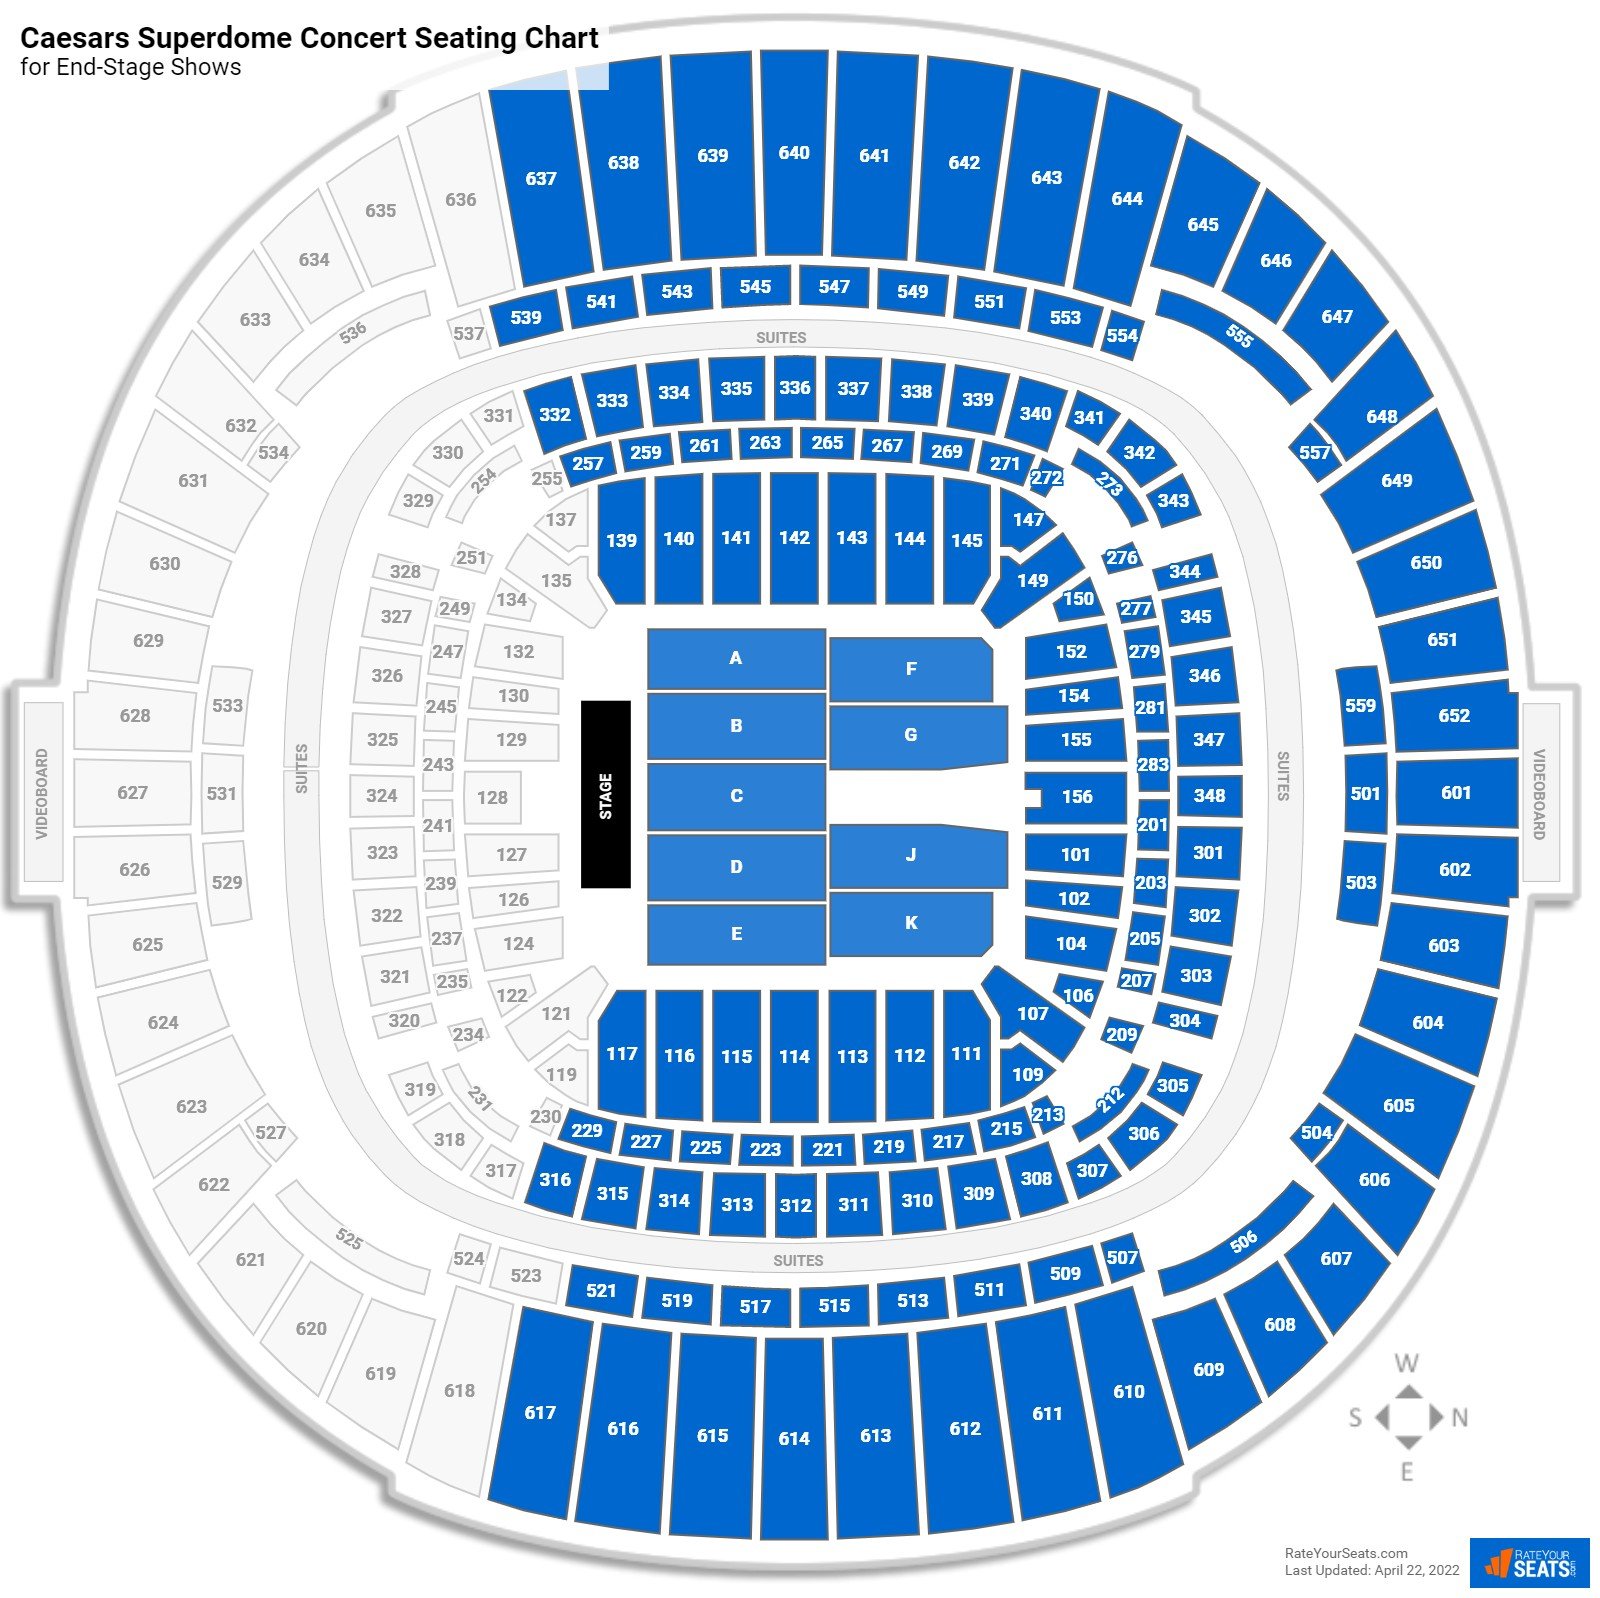 Section 155 at Superdome for Concerts